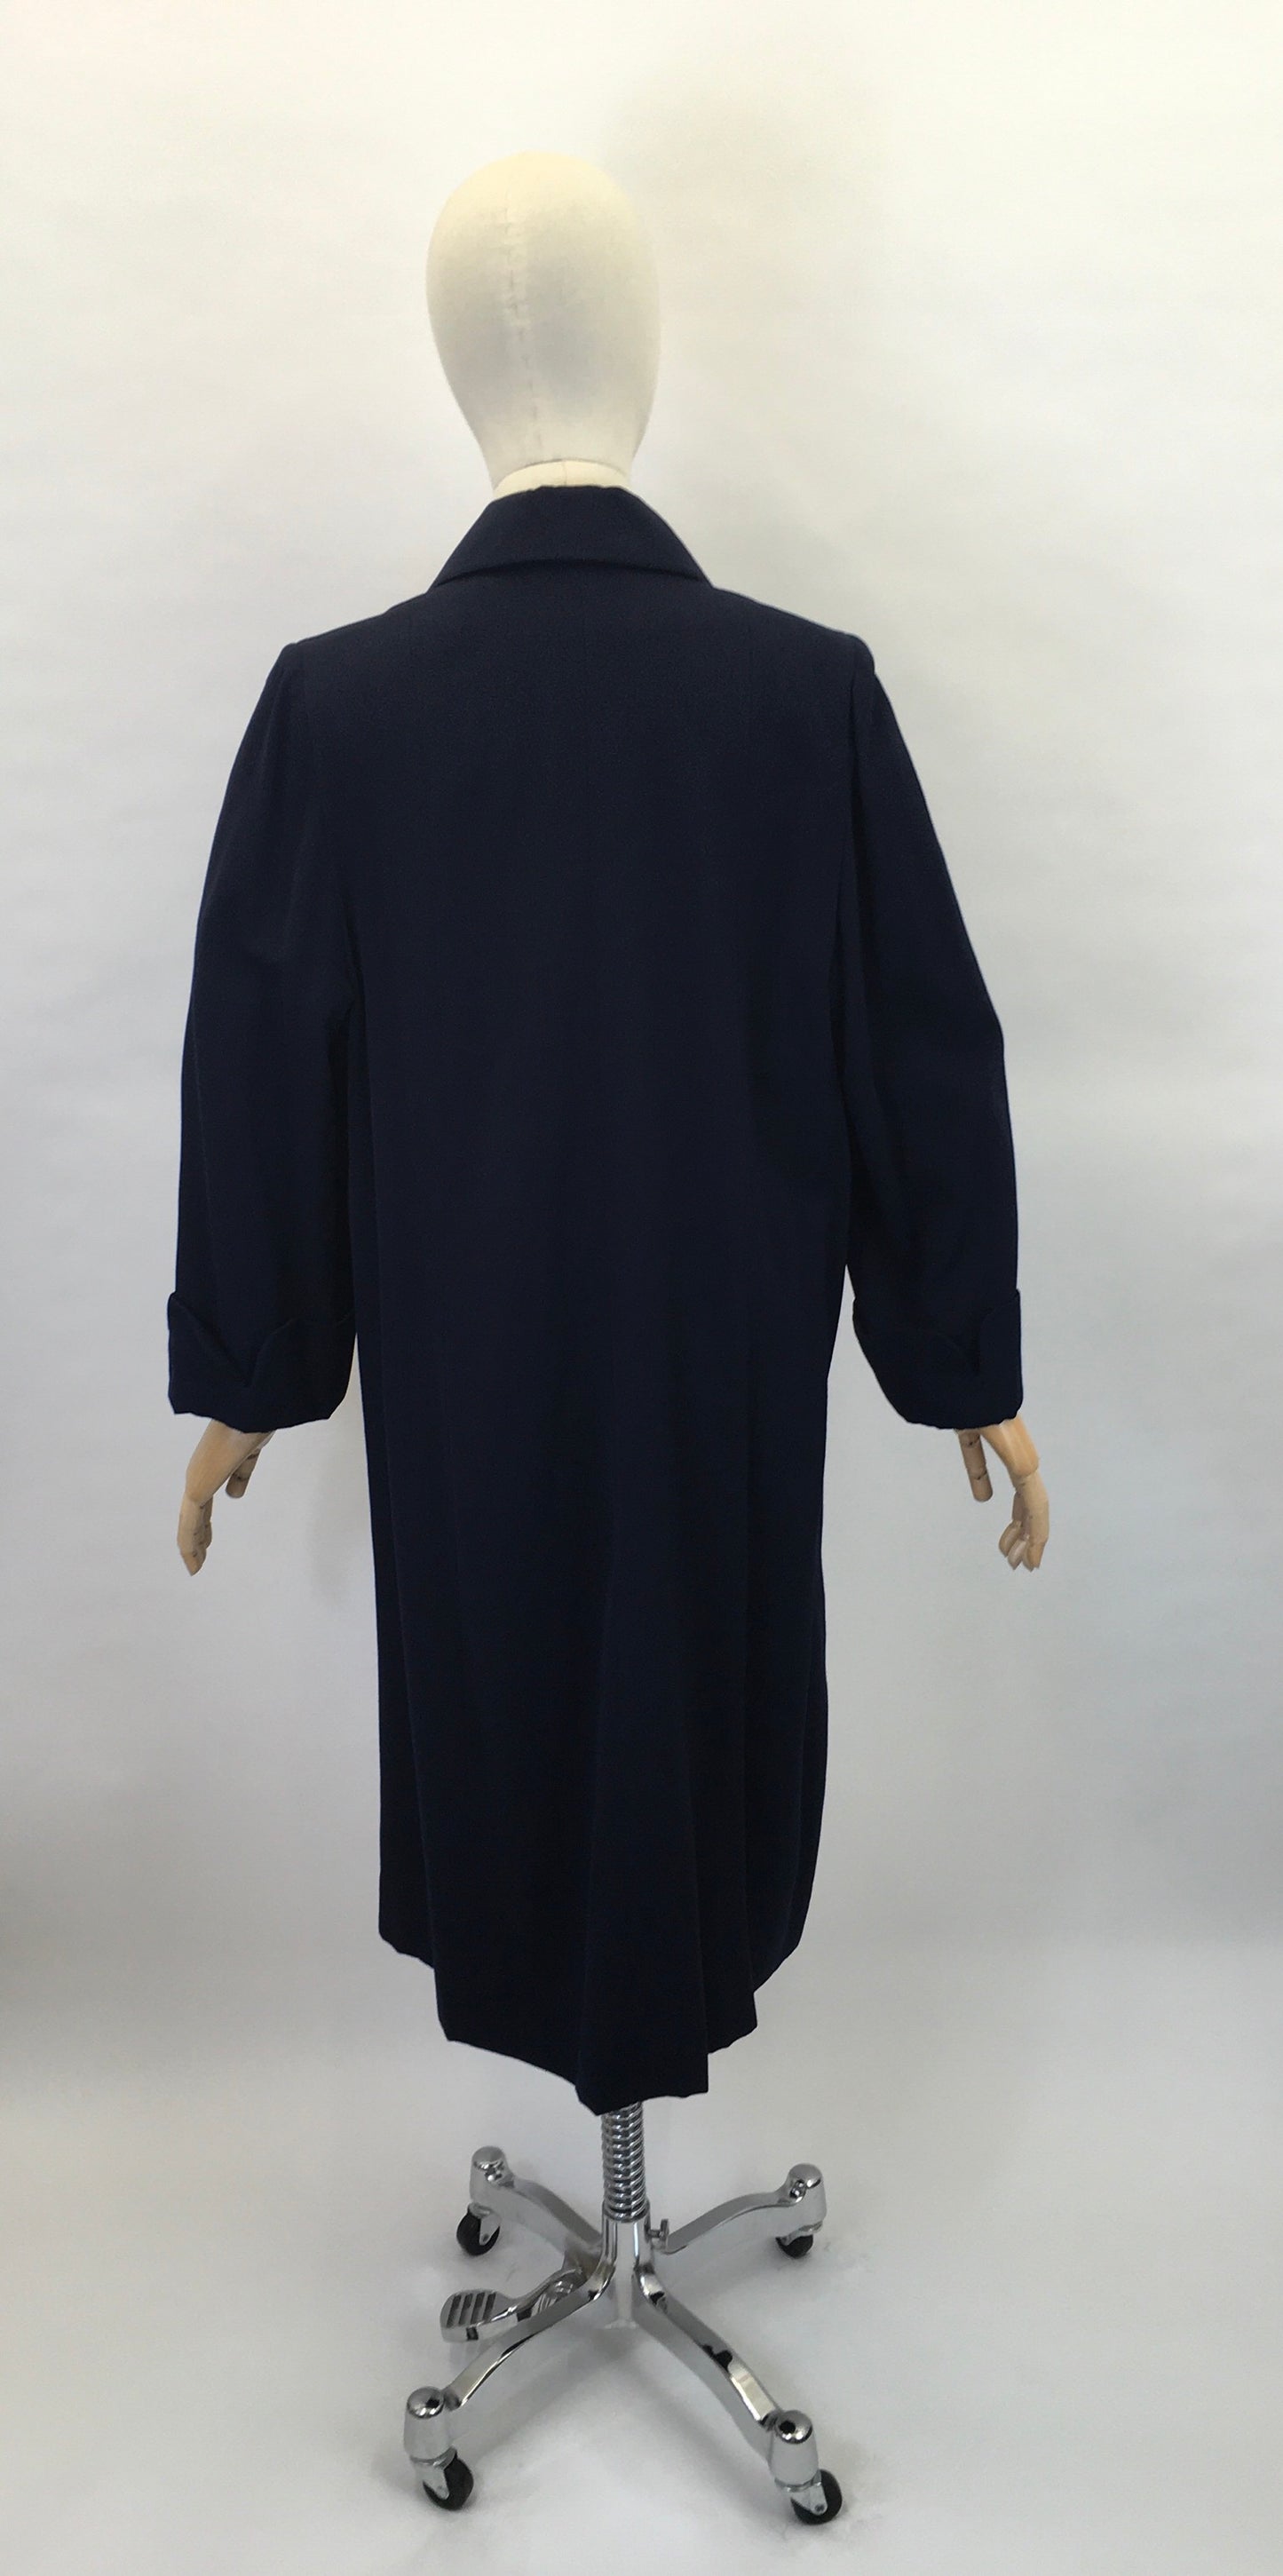 Original 1940’s Navy Gabardine Coat - A Lovely 40’s Silhouette with Beautiful Details